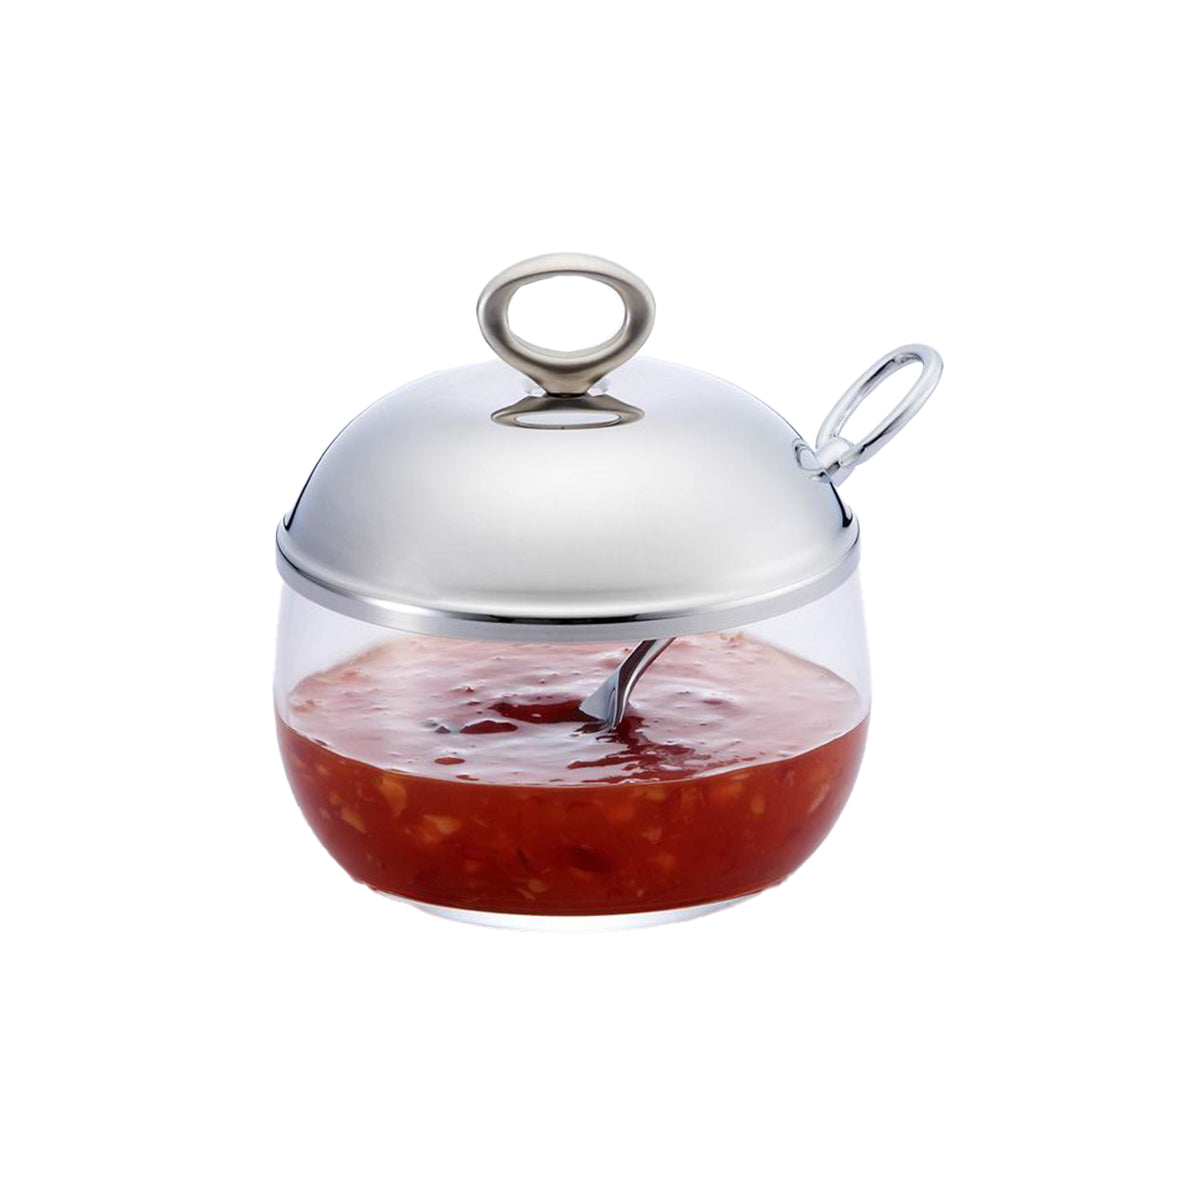 Sugar Pot with Spoon -Stainless Steel 18/10